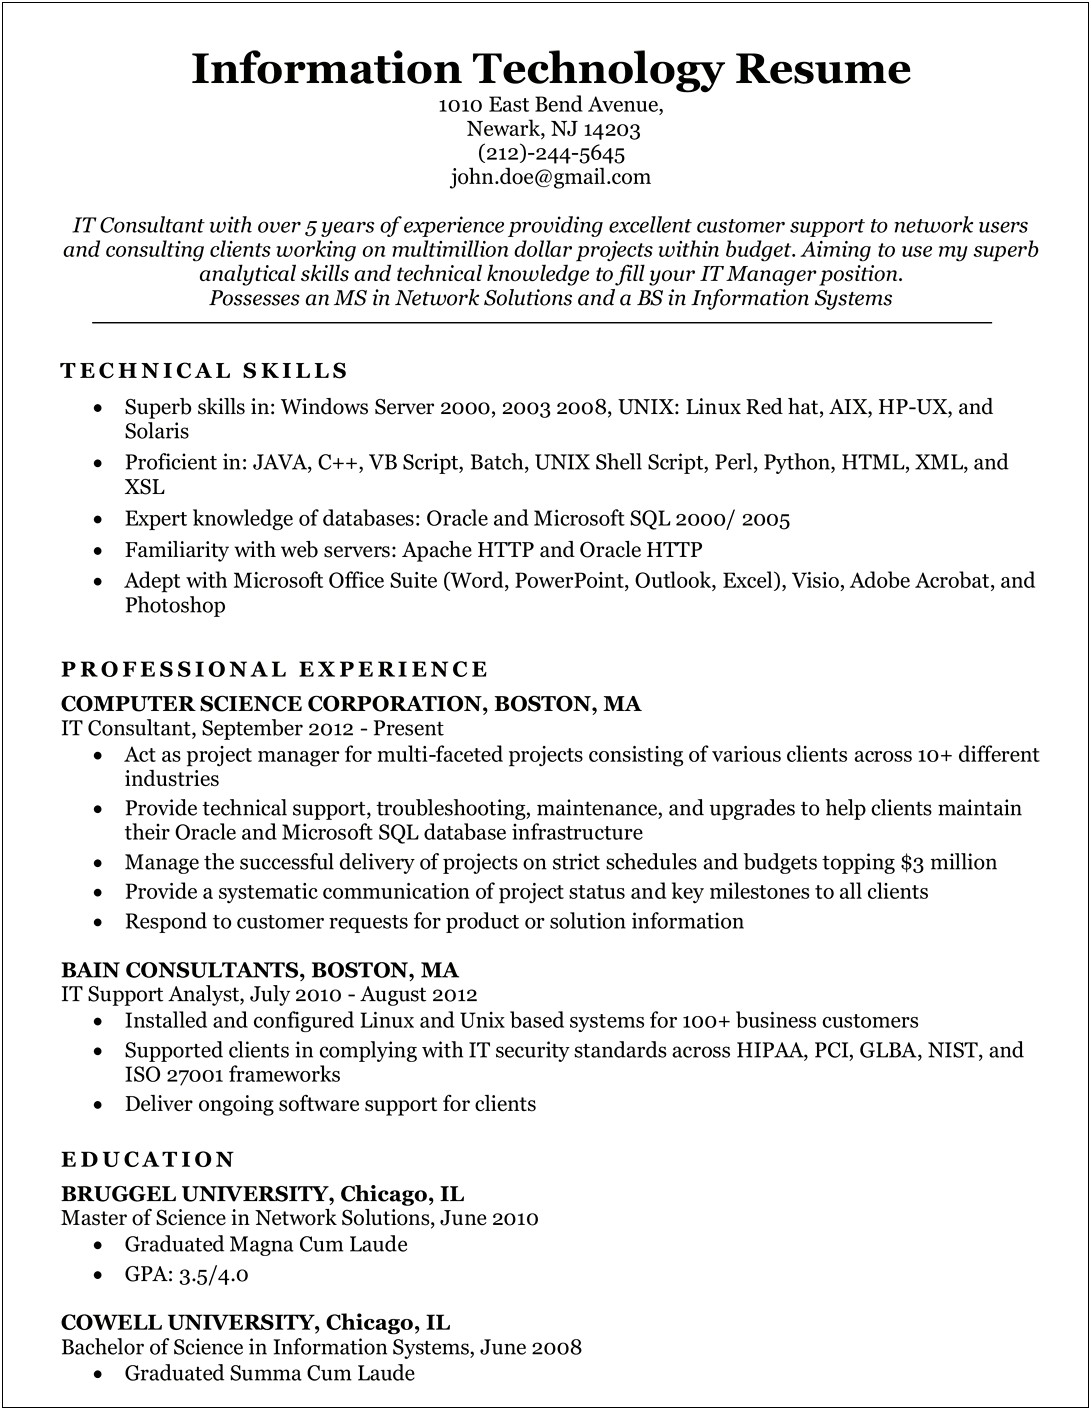 Technical Skills Section On Resume